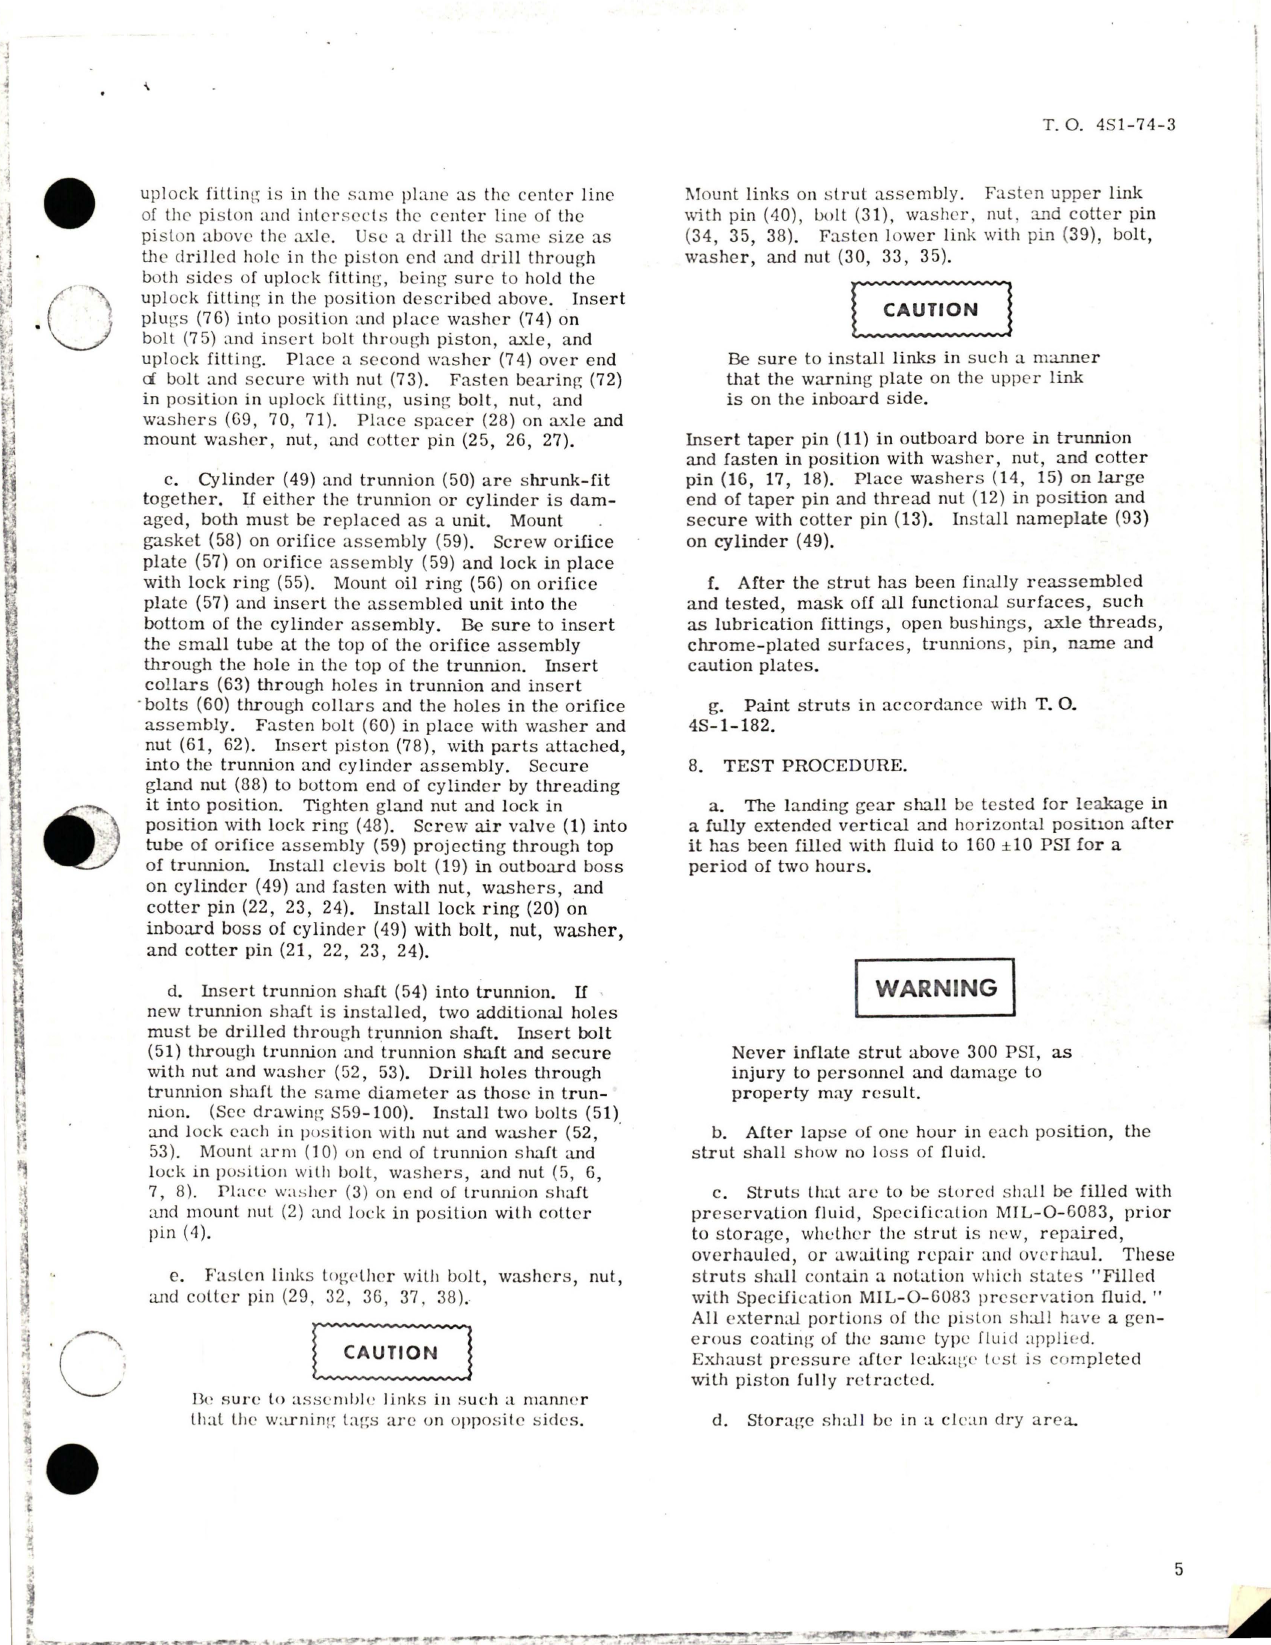 Sample page 5 from AirCorps Library document: Overhaul Instructions with Parts Breakdown for Main Landing Gear Strut Assemblies - Parts RA75450-1, RA75450-2, RA75450-21, and RA75450-22